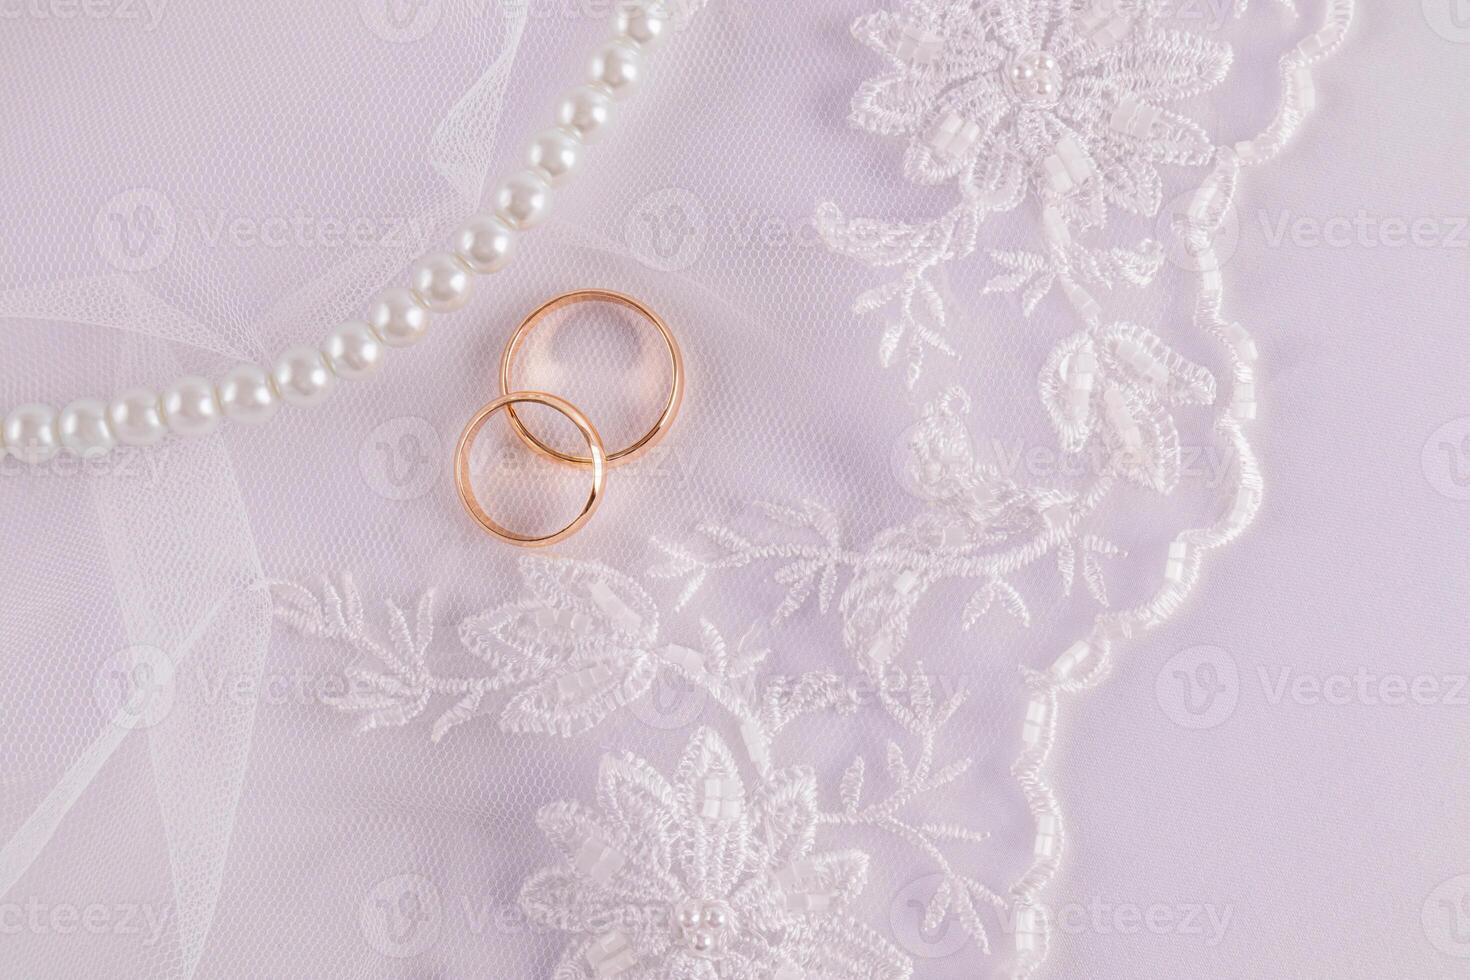 Chic wedding background for greeting card, invitation, cover design. delicate white embroidery flowers, two gold wedding rings, pearl beads. photo